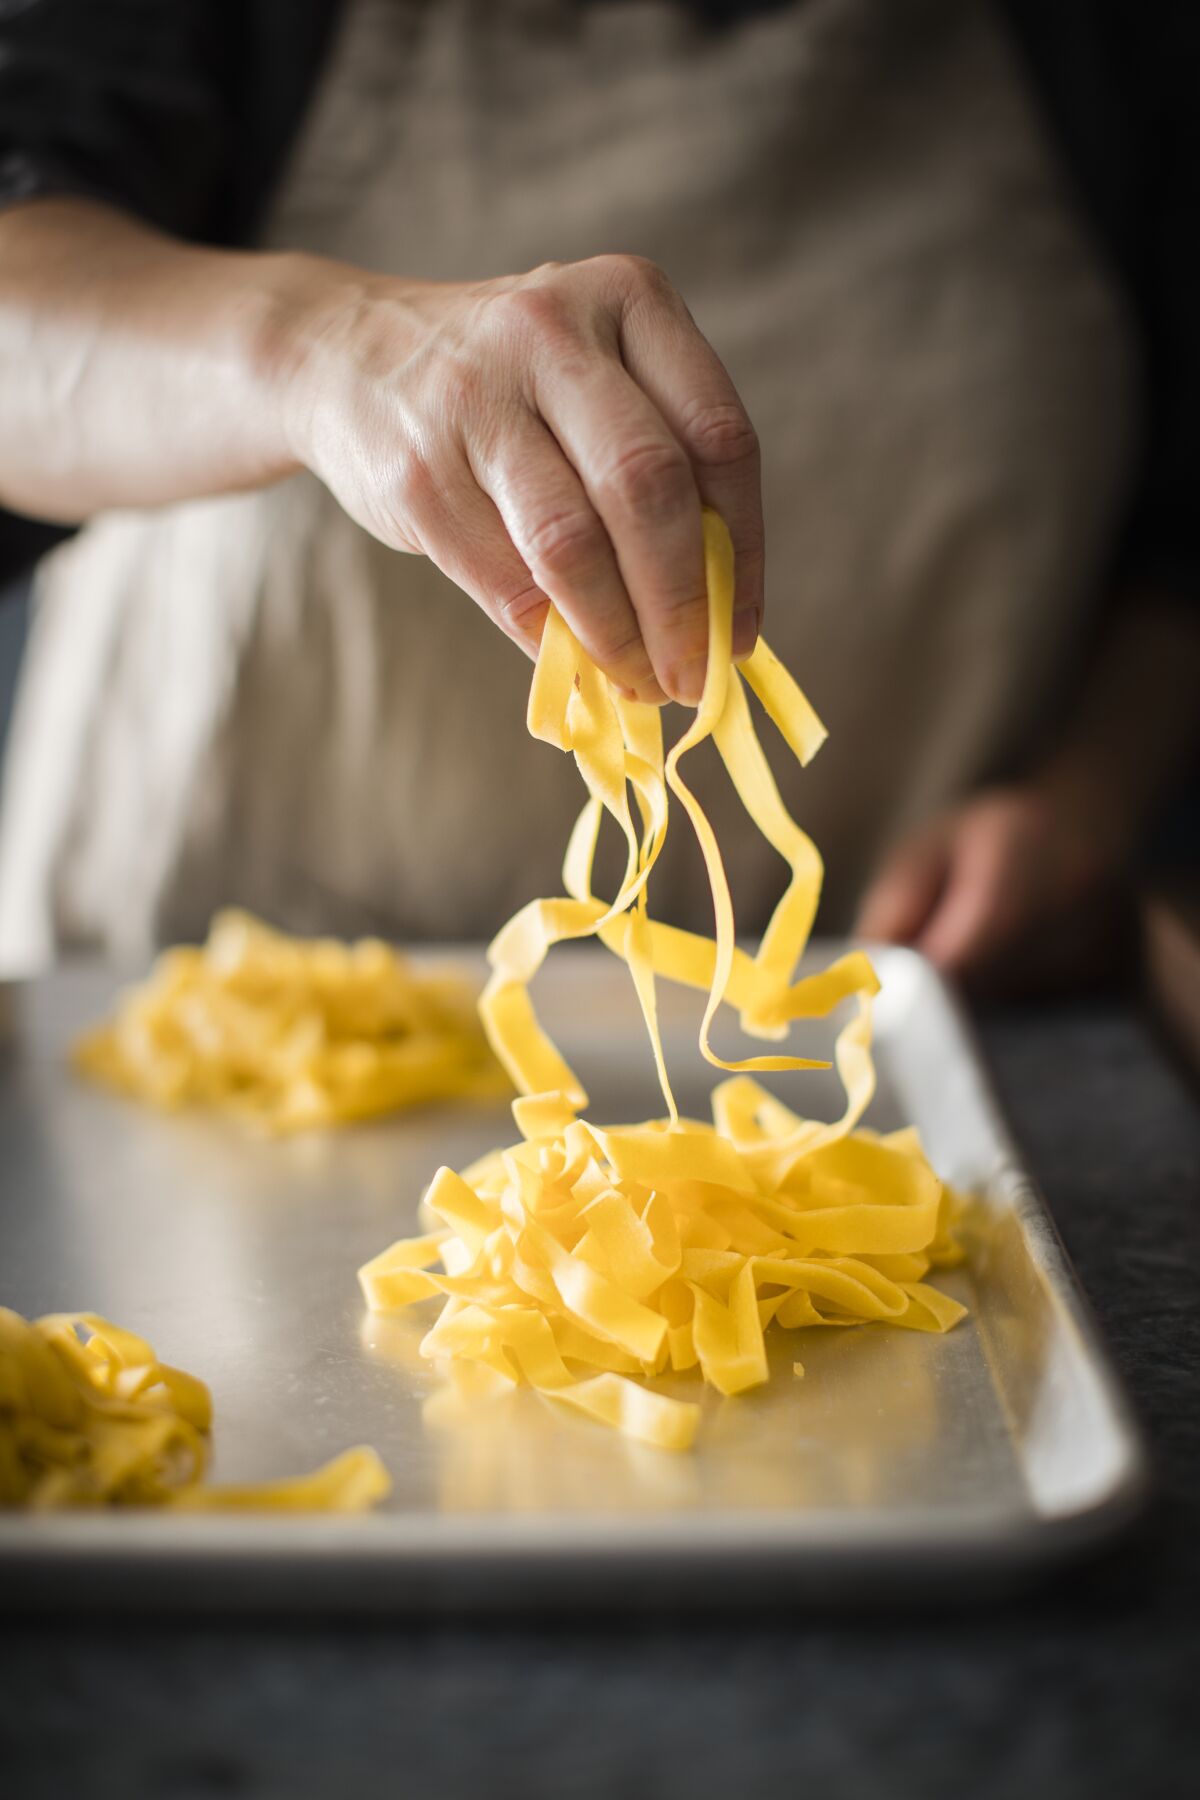 The fresh pasta strands take only about 3 minutes to cook to al dente.